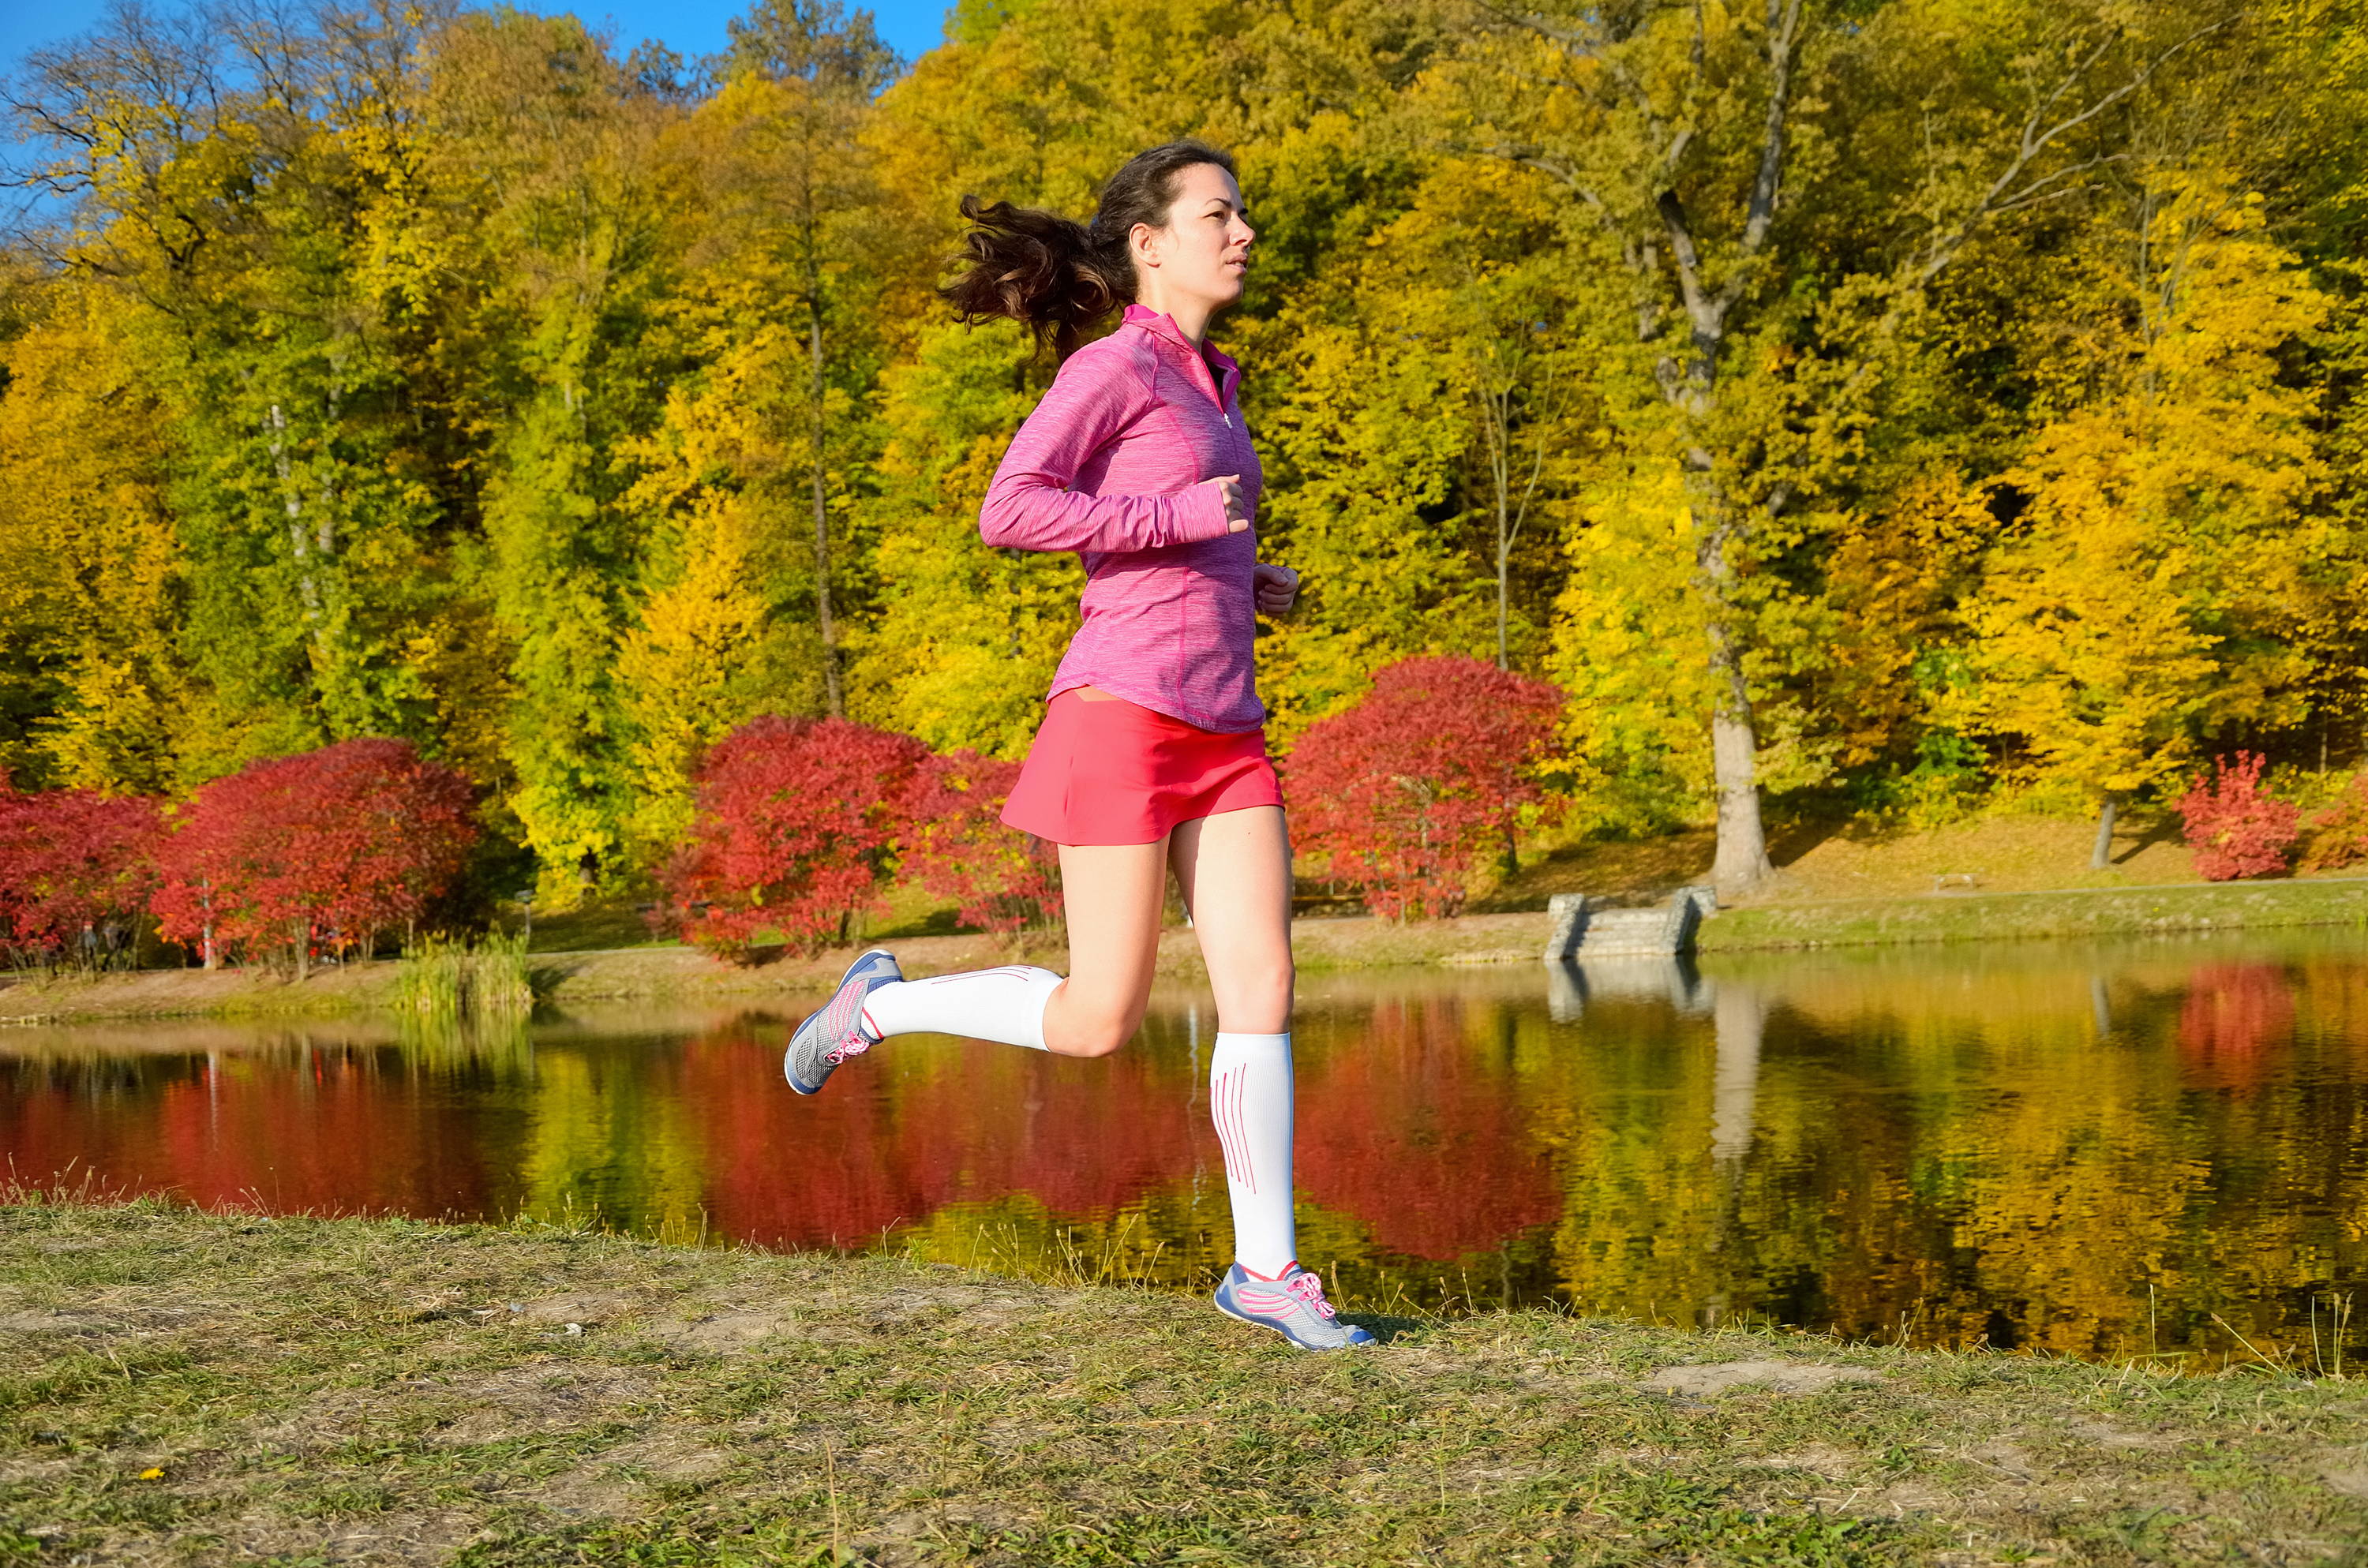 Performance & Running Clothes for Different Temperatures and Climates